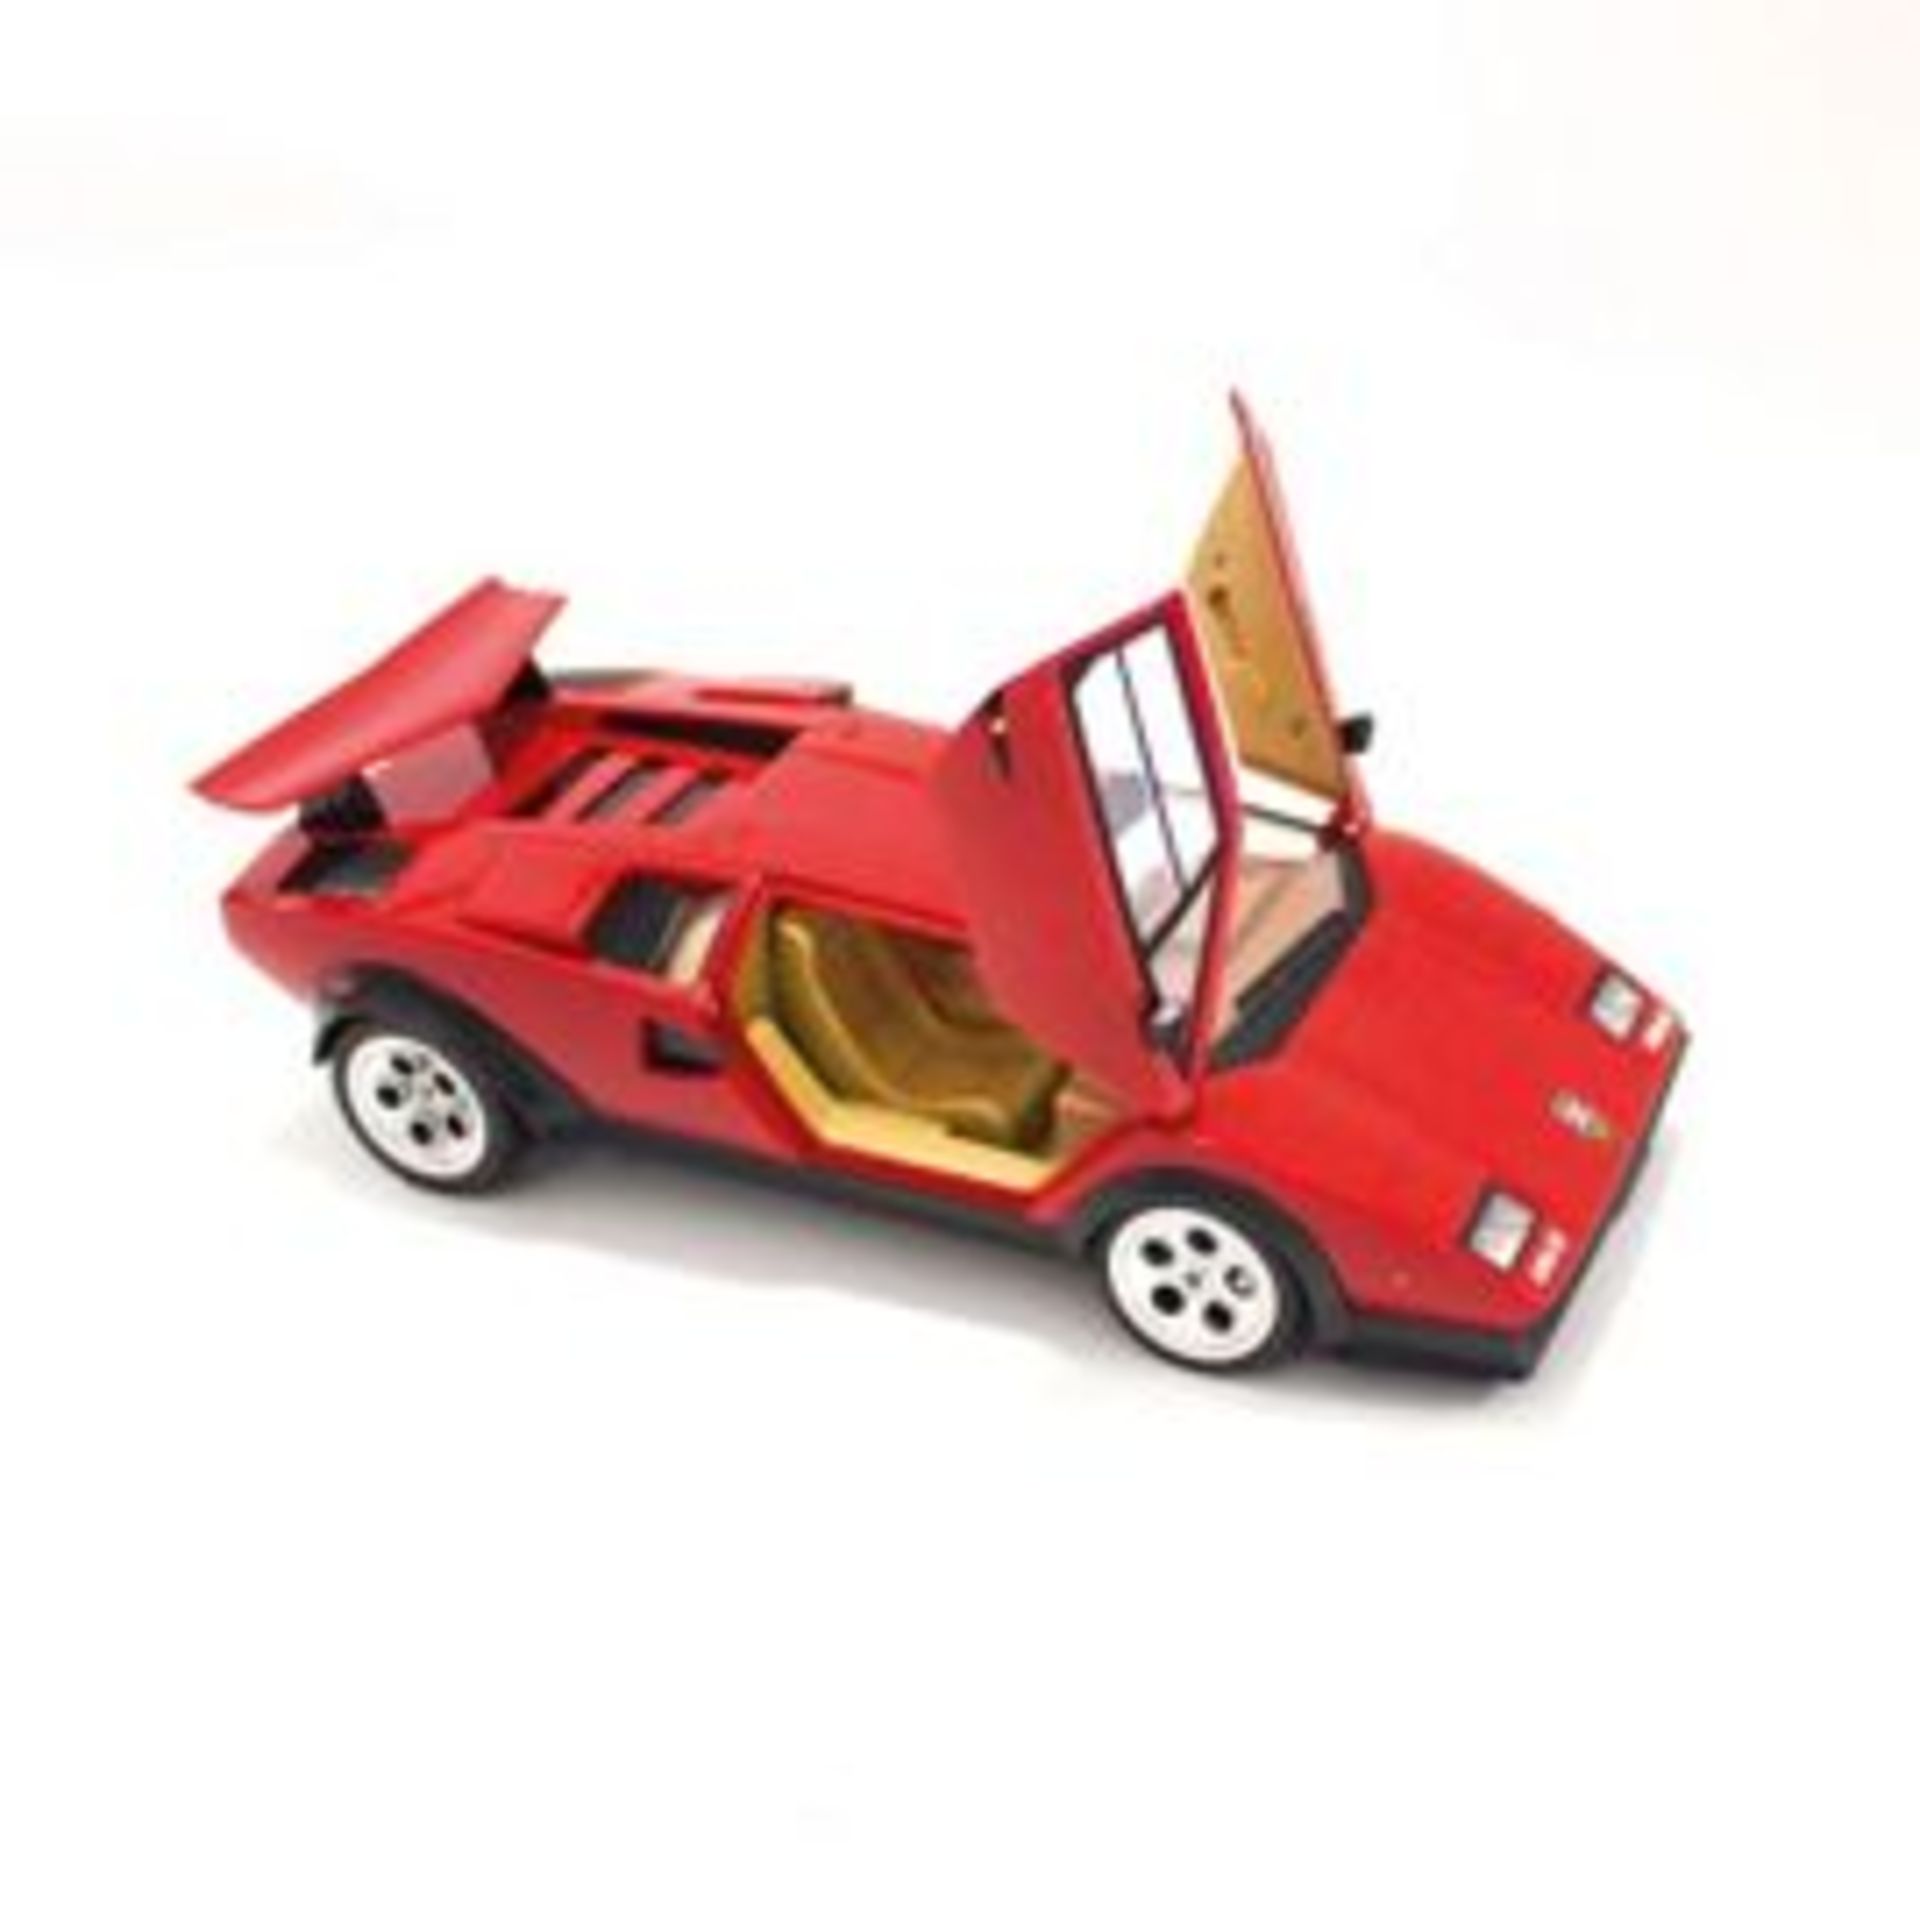 V *TRADE QTY* Brand New Radio Control 1:14 Scale Lamborghini Wolf Countach LP500S Officially - Image 2 of 2